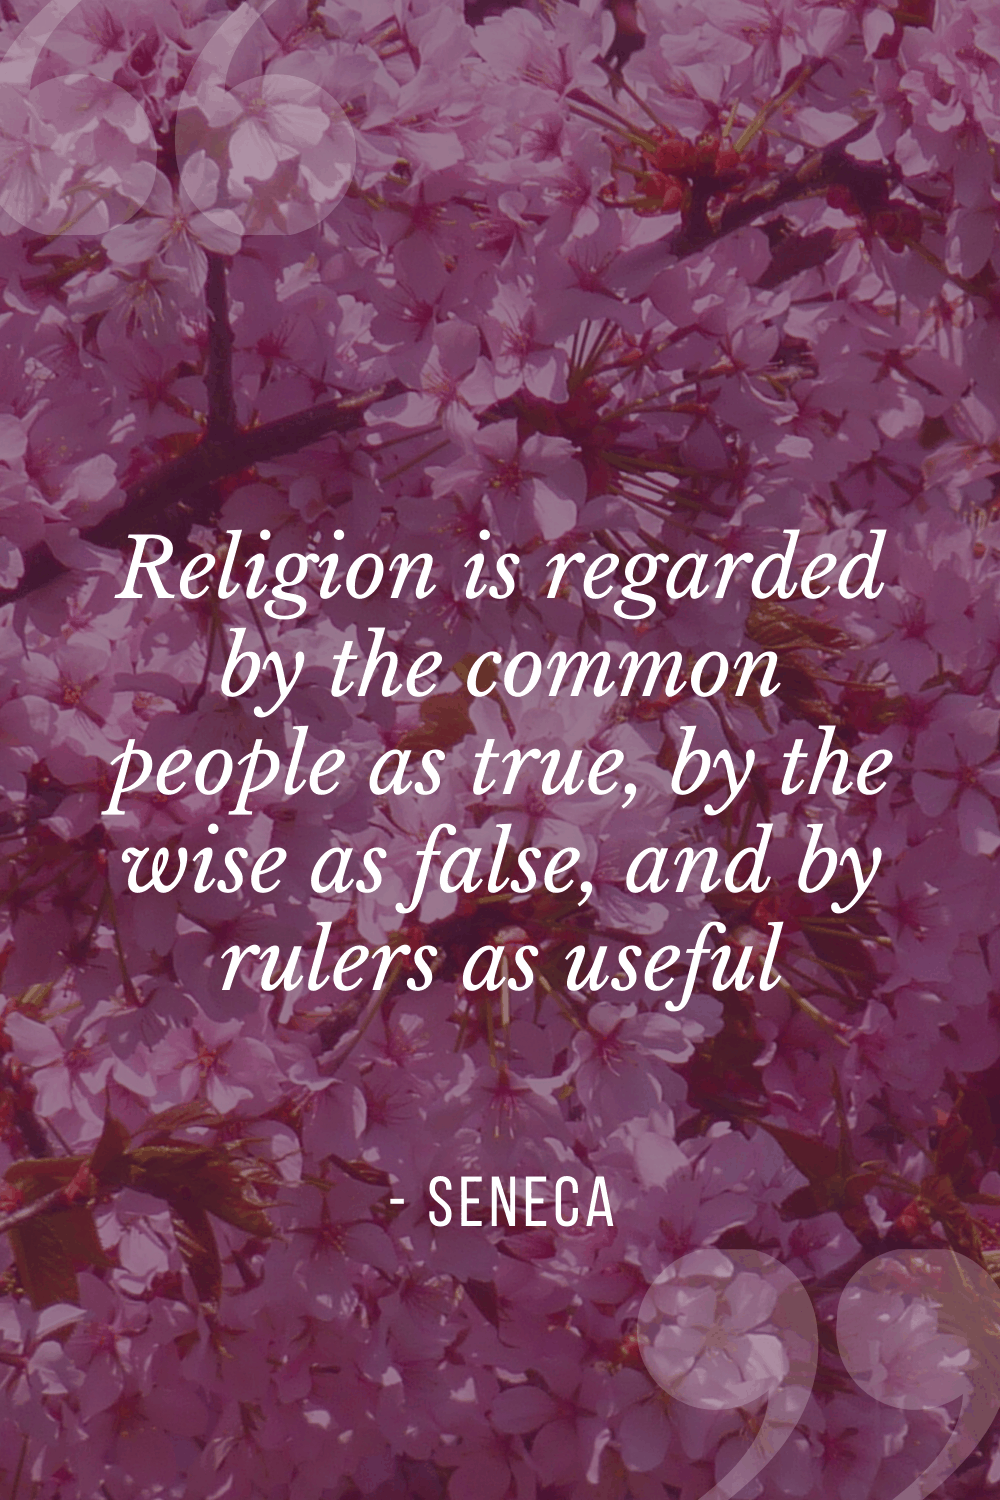 “Religion is regarded by the common people as true, by the wise as false, and by rulers as useful”, Lucius Annaeus Seneca